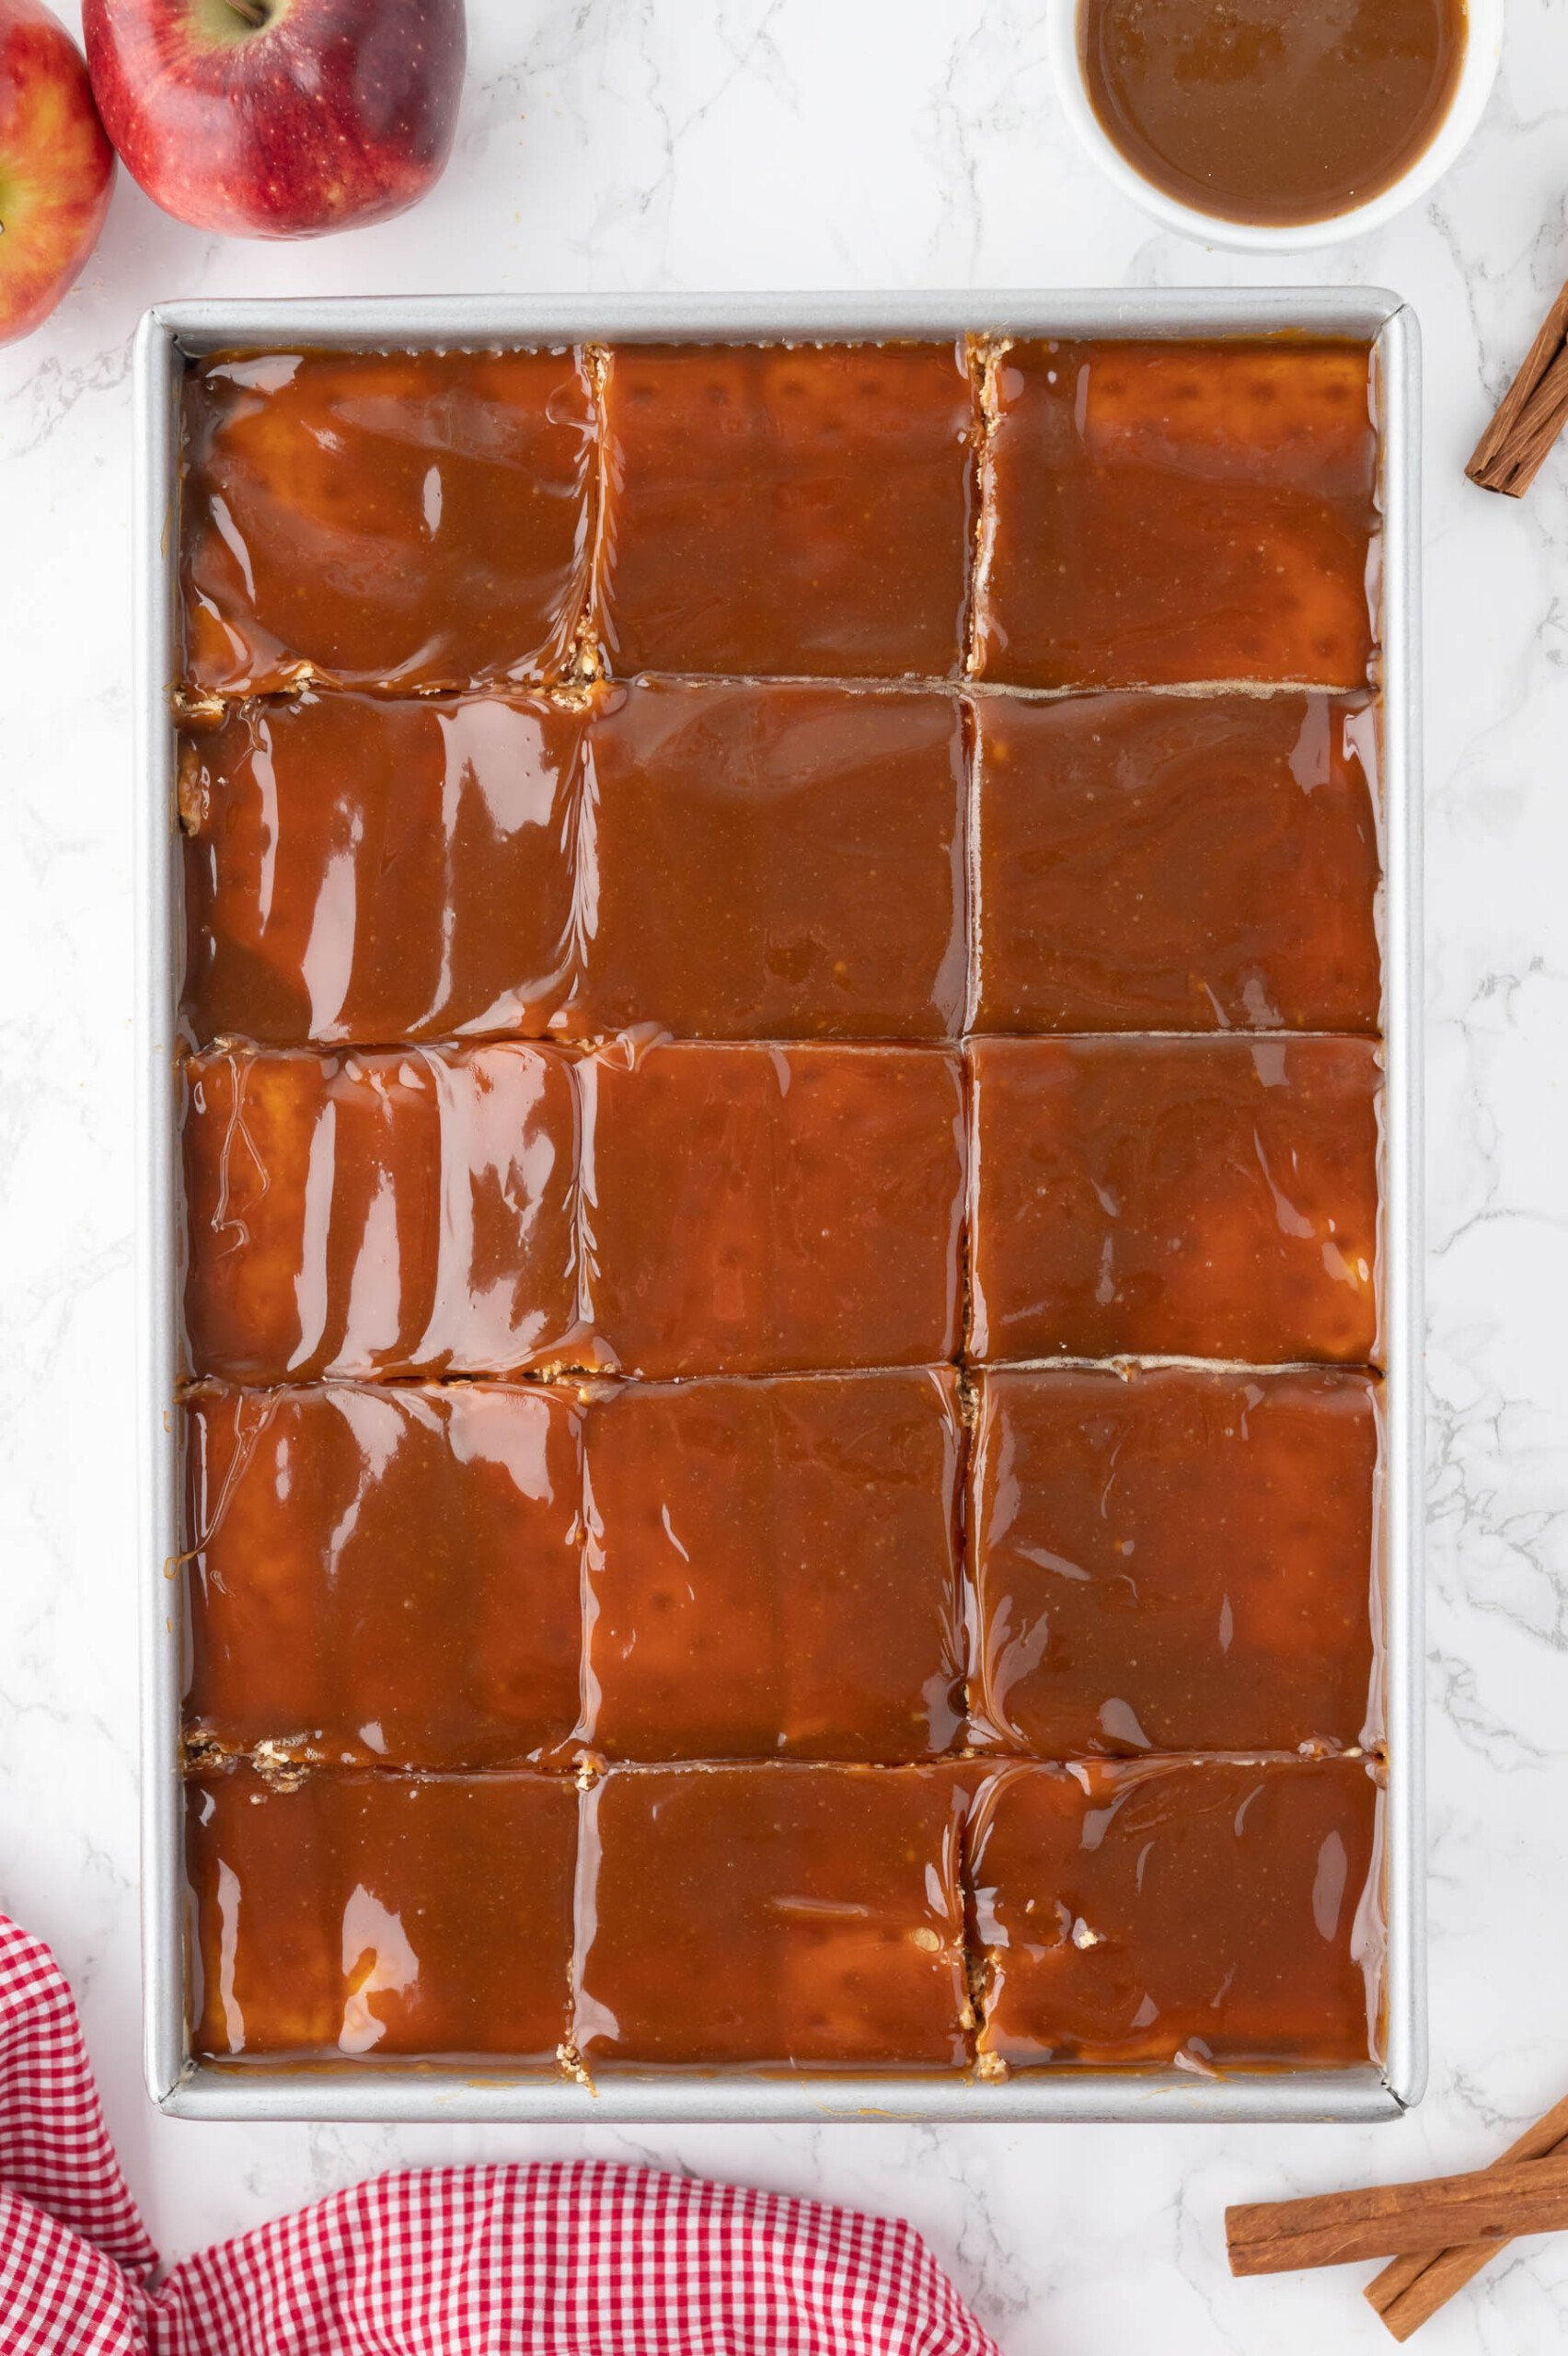 A caramel apple eclair cake that has been sliced into squares.